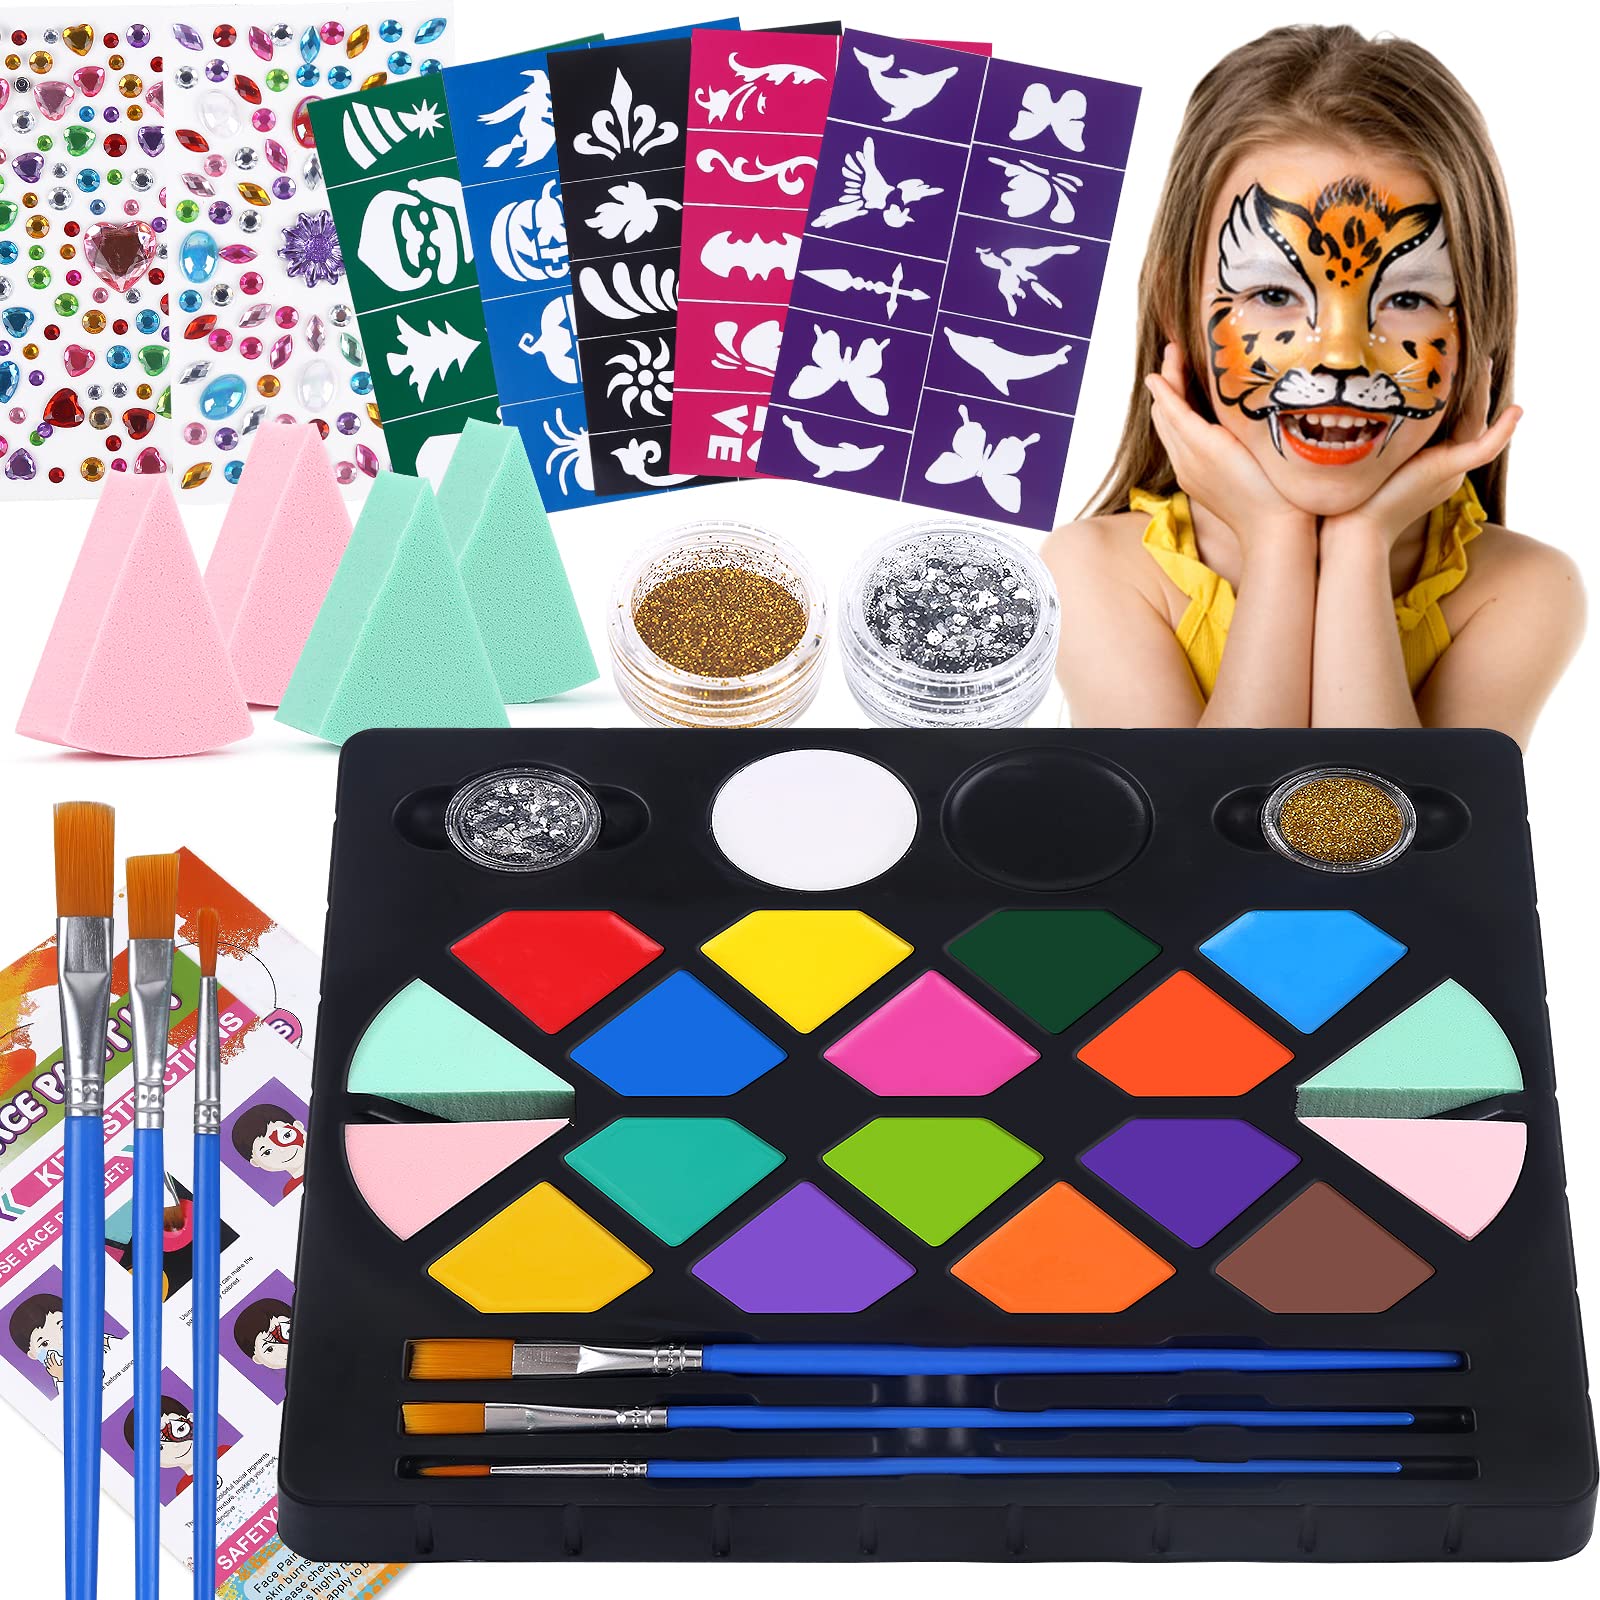 Wismee Face Painting Kit for For Kids Party - Non-Toxic One Stroke Rainbow  Face & Body Painting Kit with 40 Stencils, 11 Painting Brushes and 10